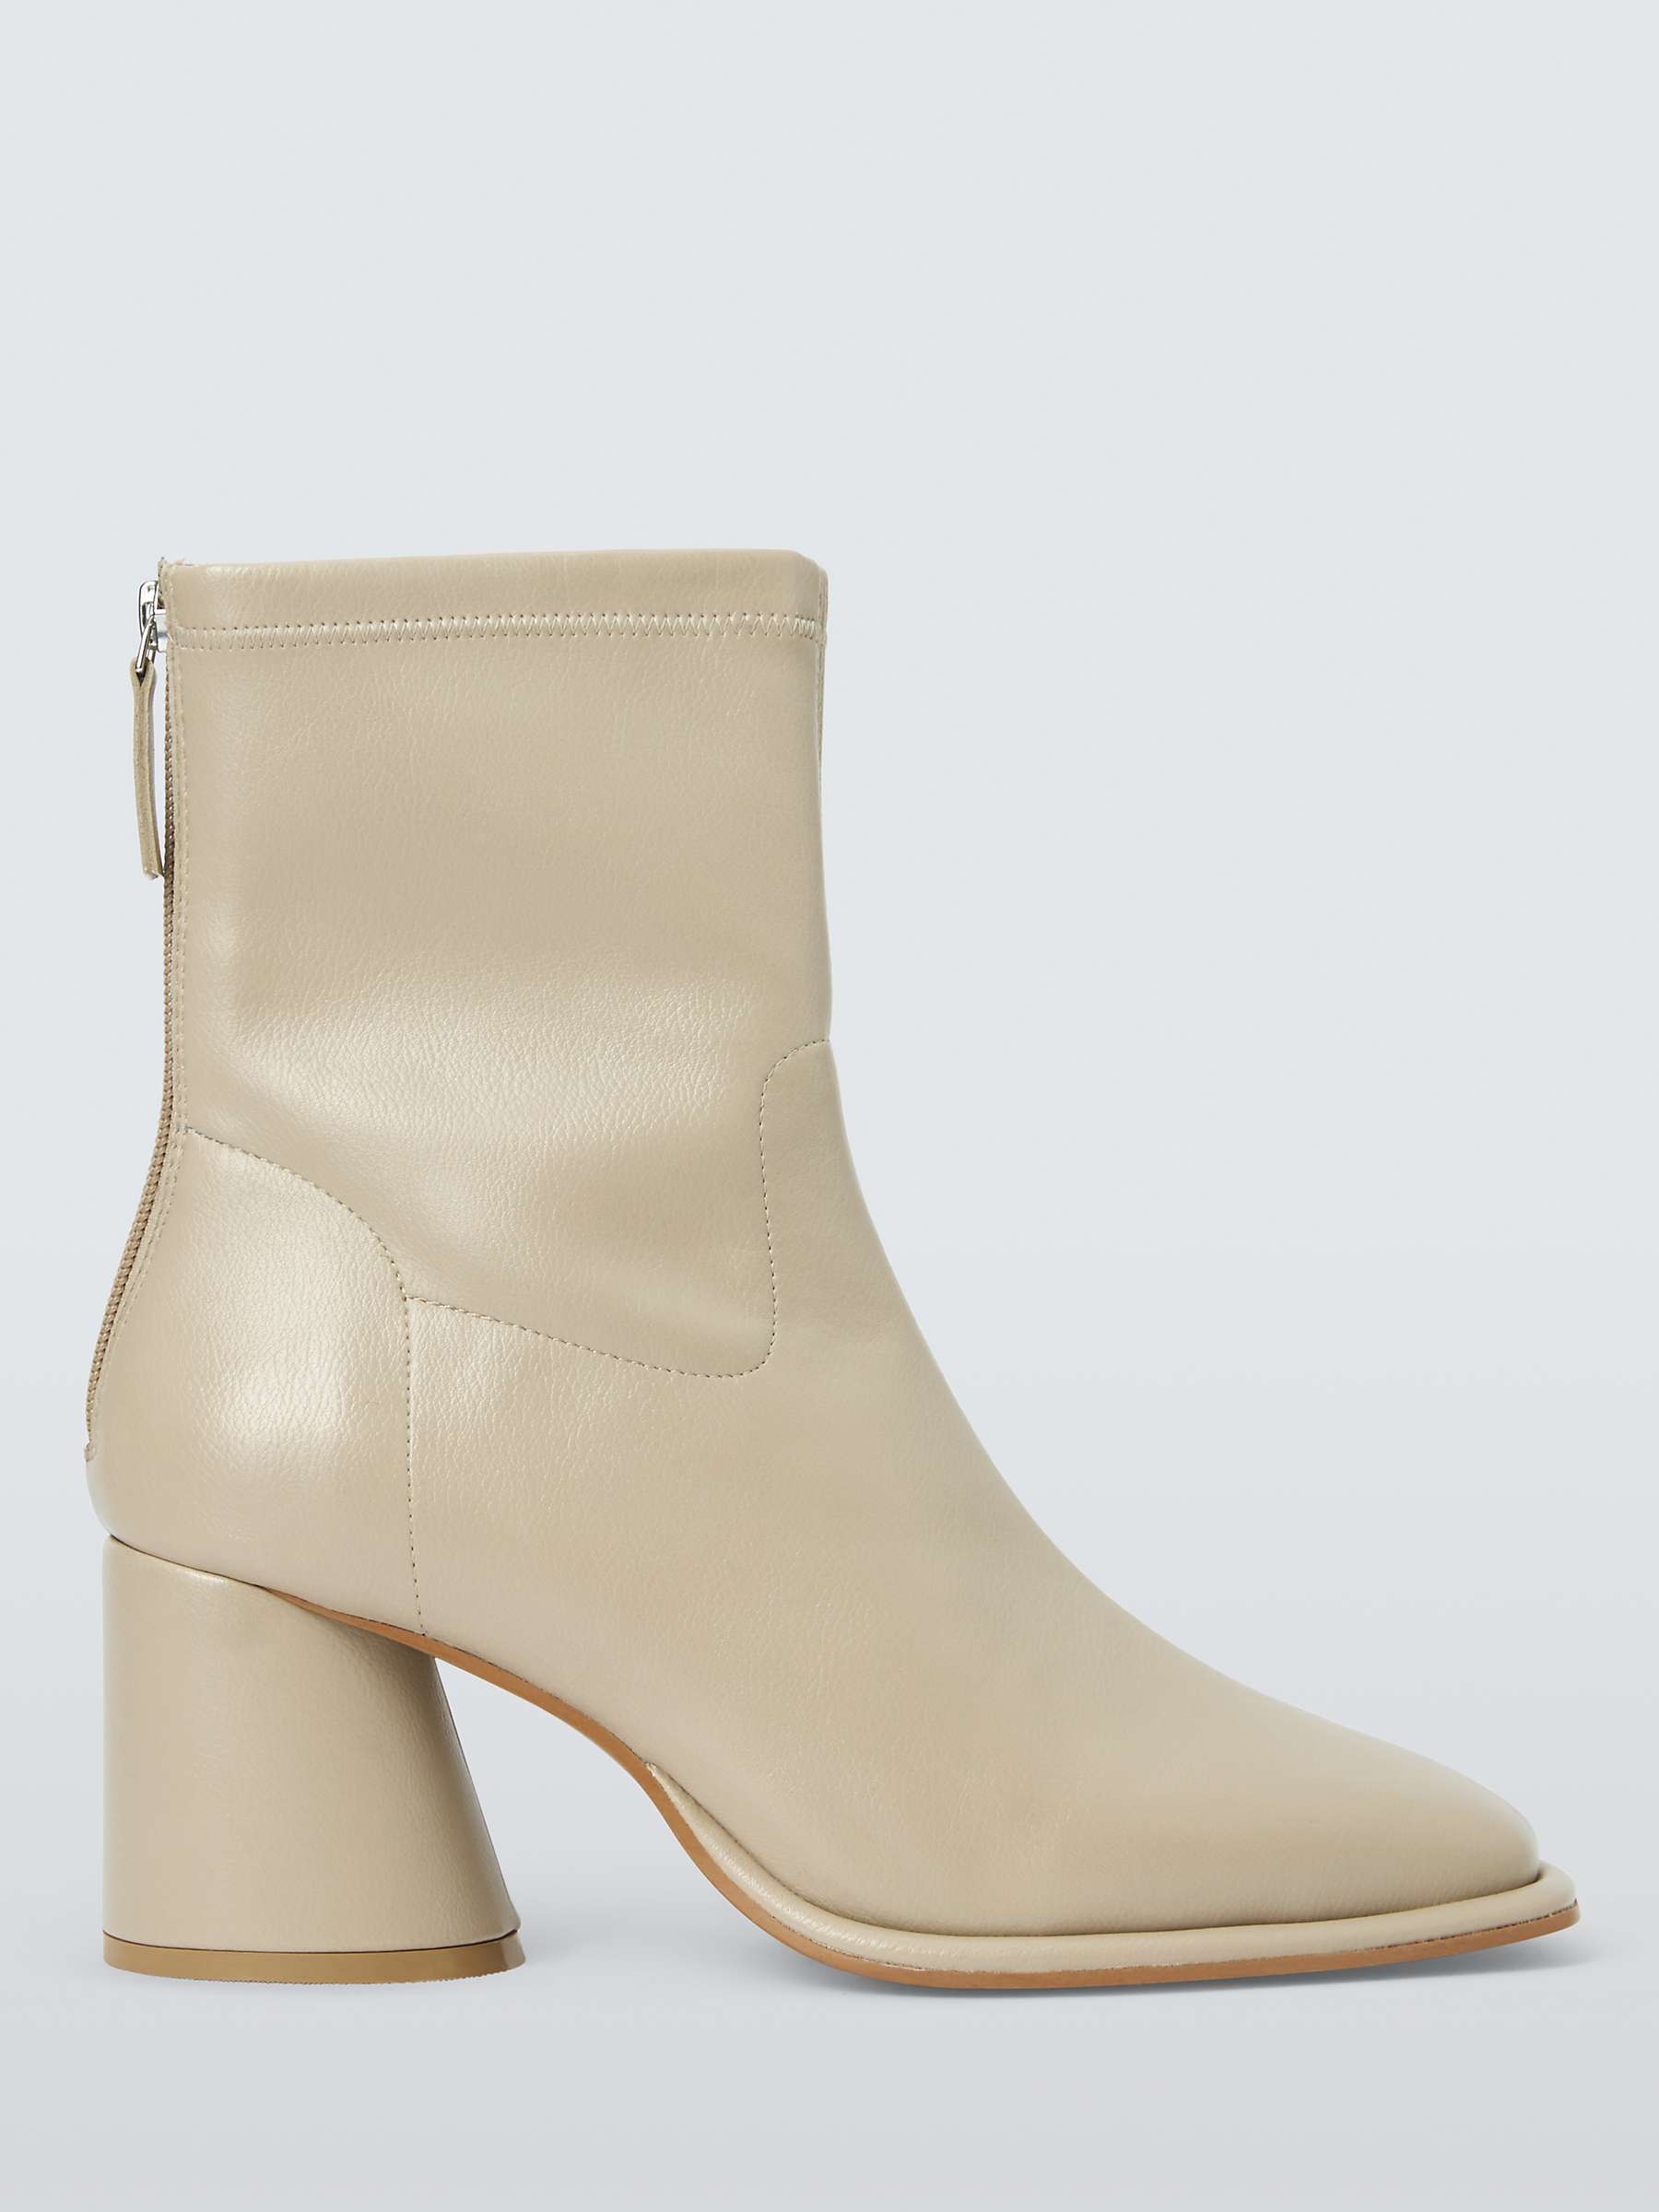 Buy John Lewis ANYDAY Orchid Faux Leather Sock Stretch Ankle Boots Online at johnlewis.com